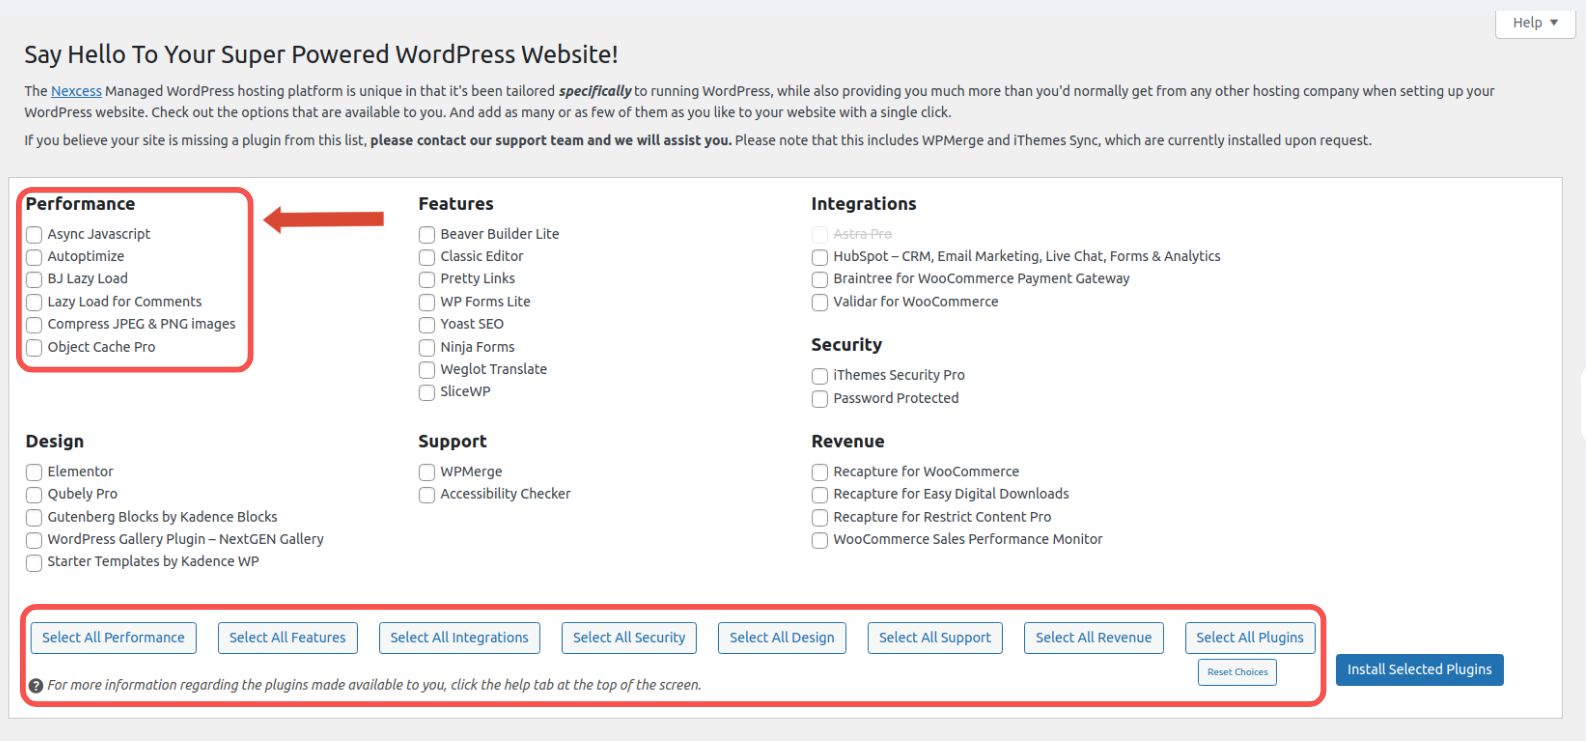 Check the WordPress plugins you want to activate using the checkboxes or click on one of the select buttons below the plugin section. Select All Plugins to install and activate all software solutions in the Nexcess Installer plugin groups. Alternatively, you have buttons available for selecting all plugins belonging to a particular group.